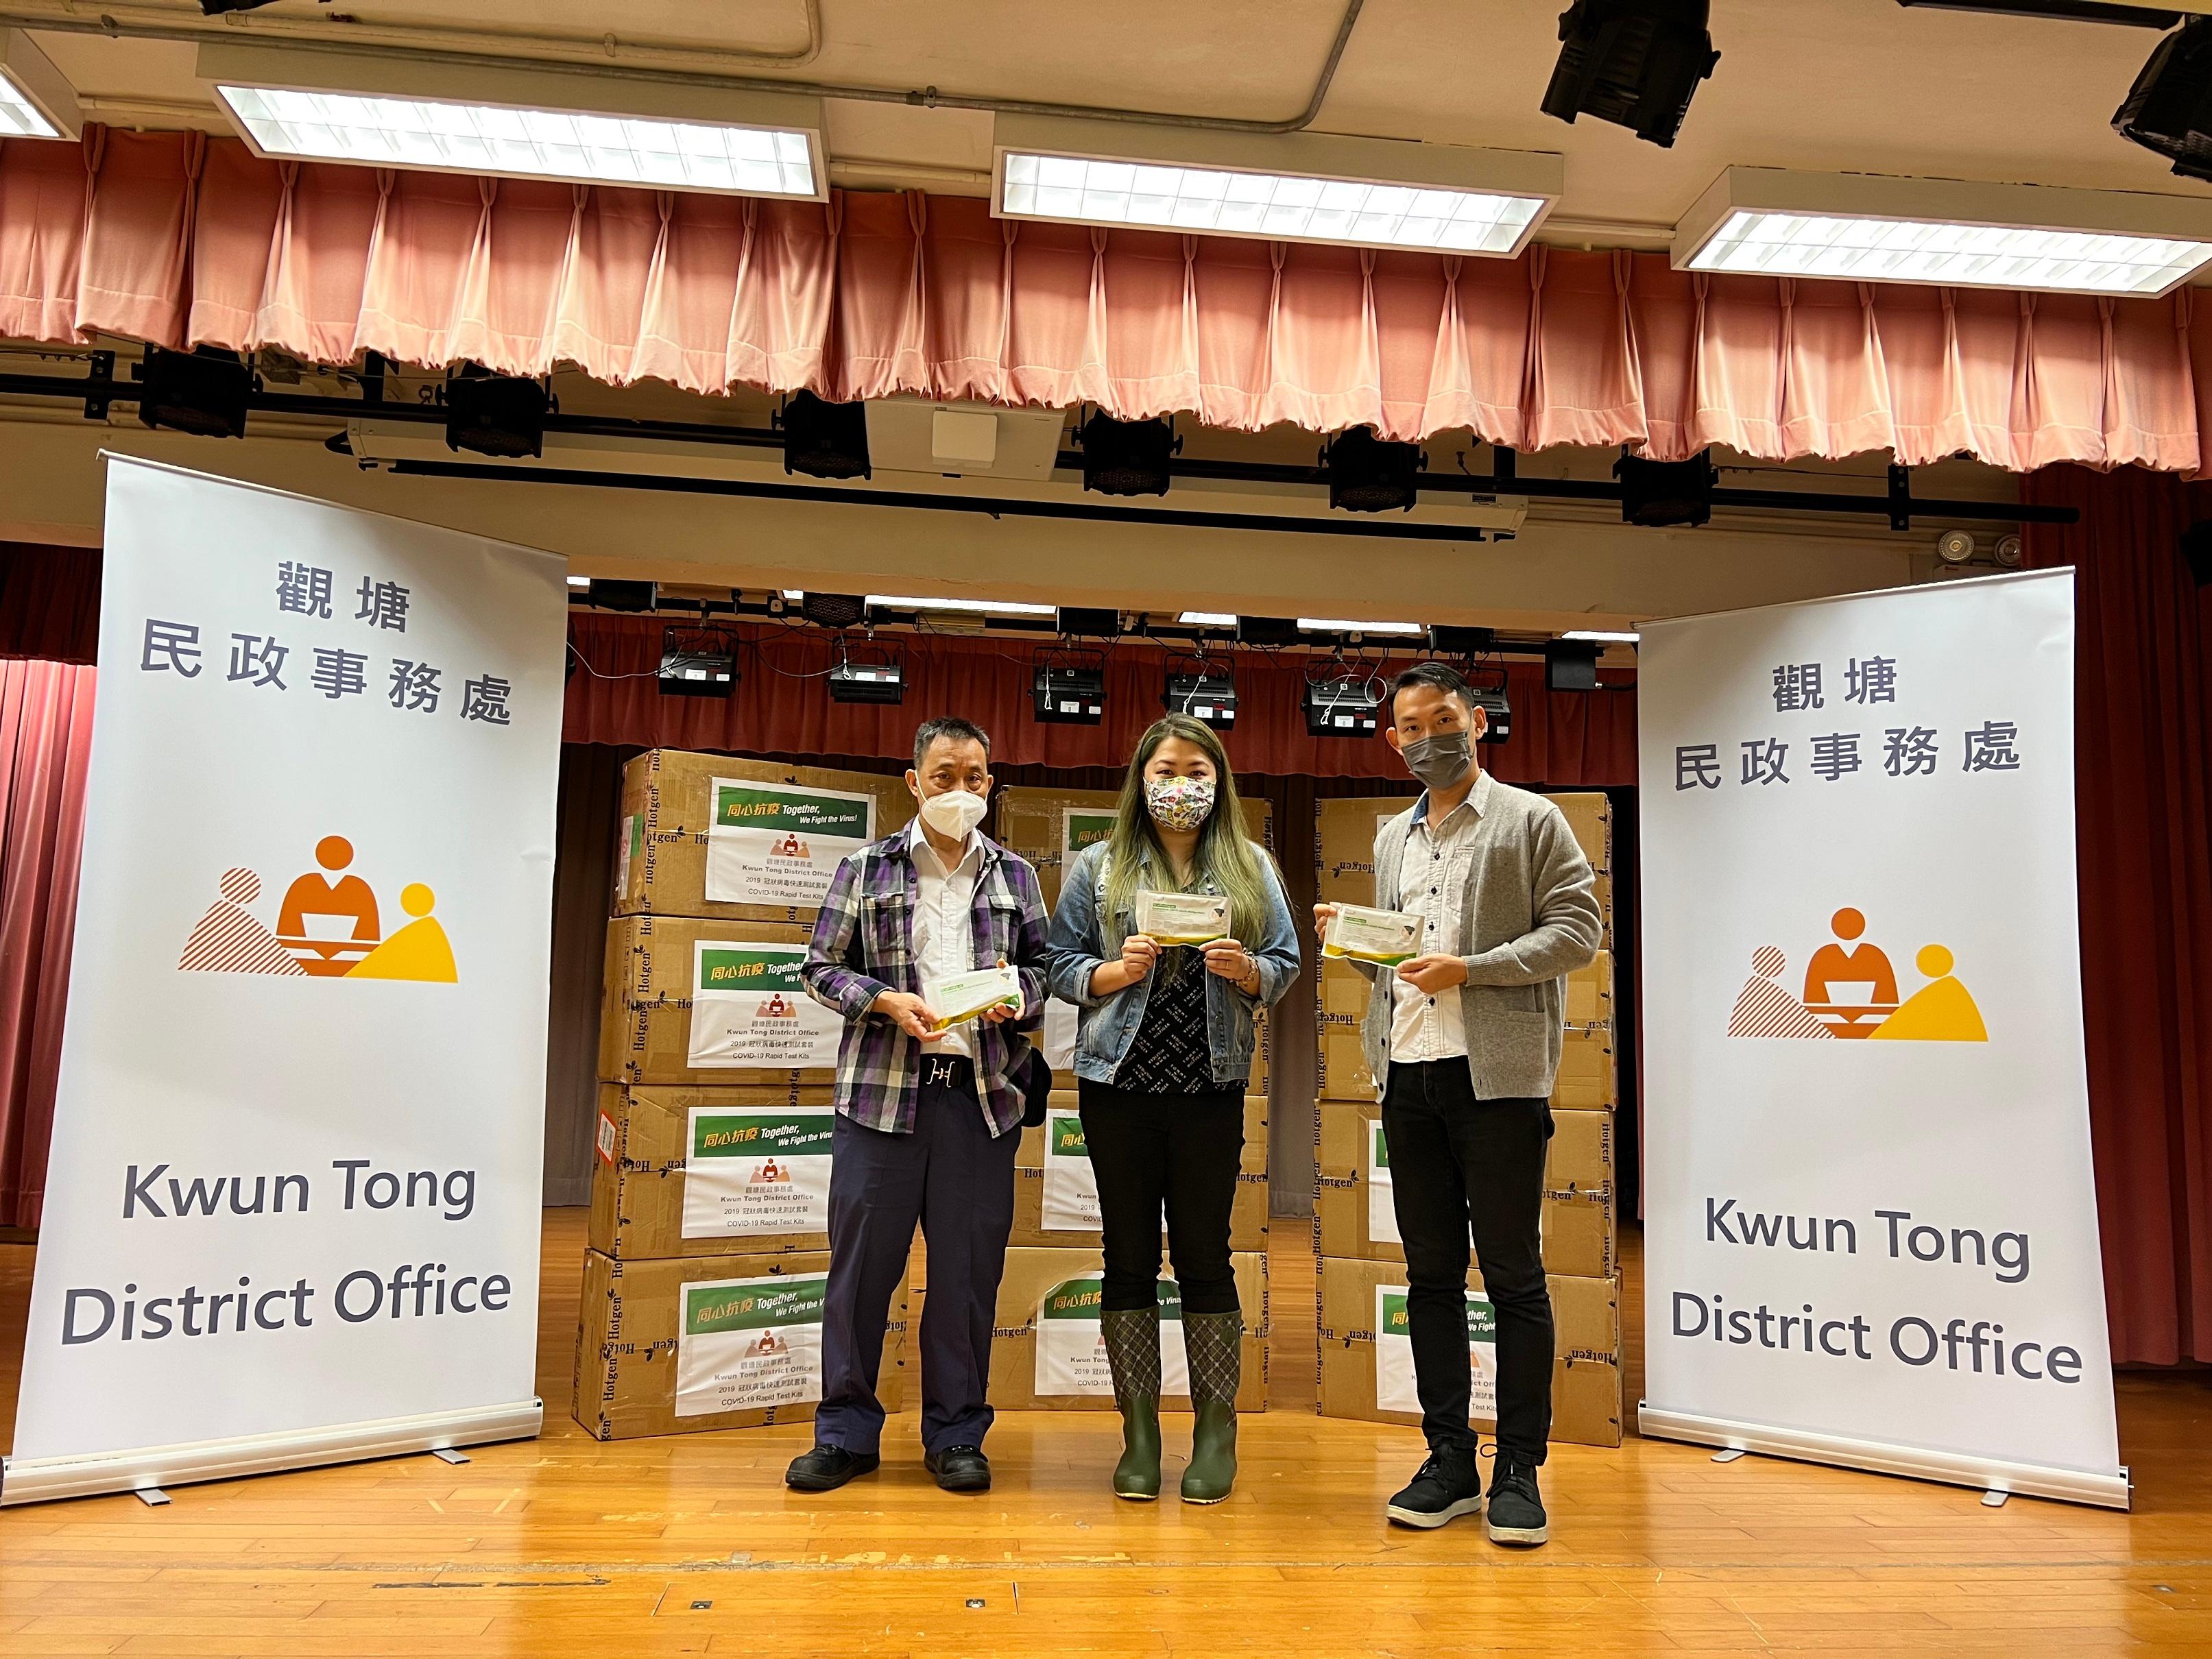 The Kwun Tong District Office today (May 14) distributed COVID-19 rapid test kits to households, cleansing workers and property management staff living and working in Shun Chi Court for voluntary testing through the property management company.
